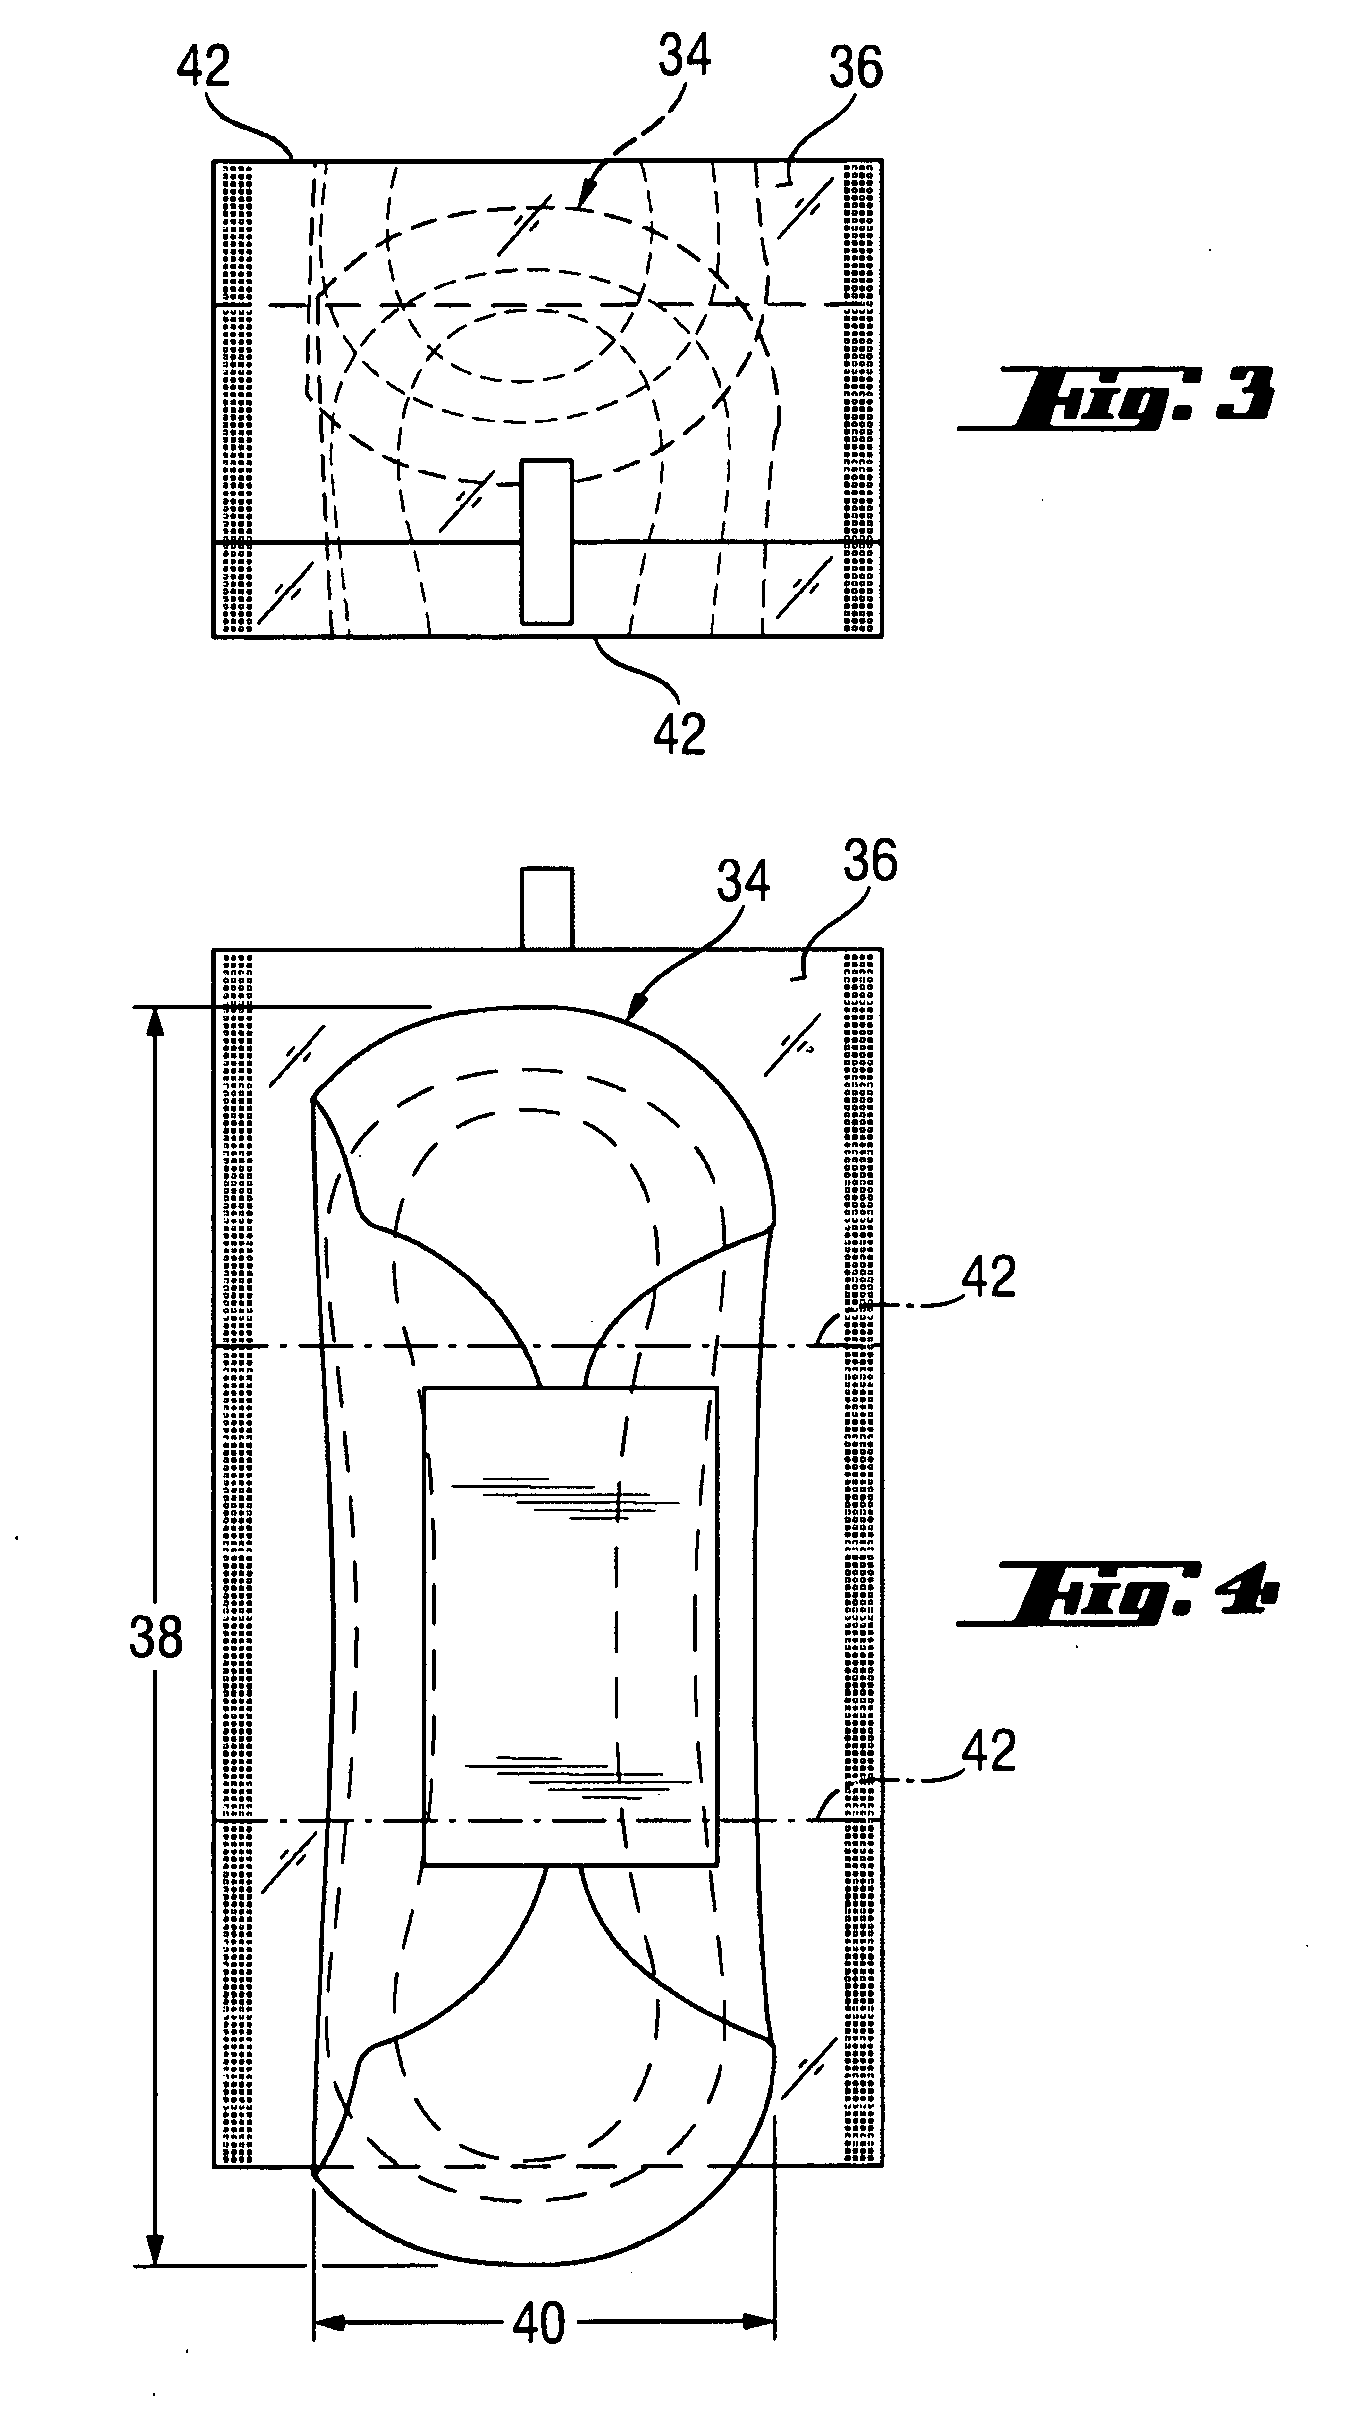 Unit load for the transport of absorbent hygiene articles